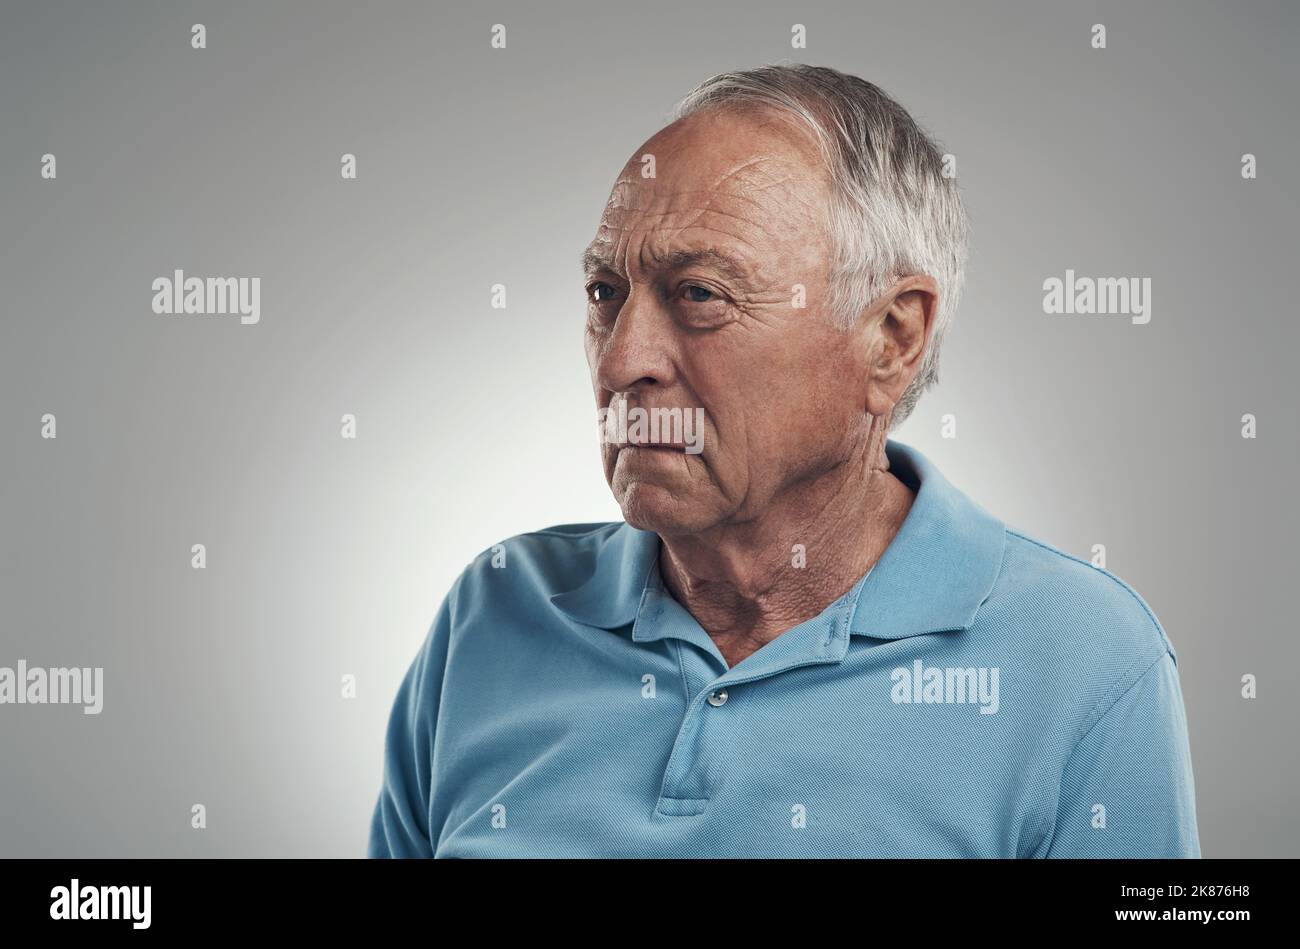 Today was a hard day. an older man looking off into the distance in a studio against a grey background. Stock Photo